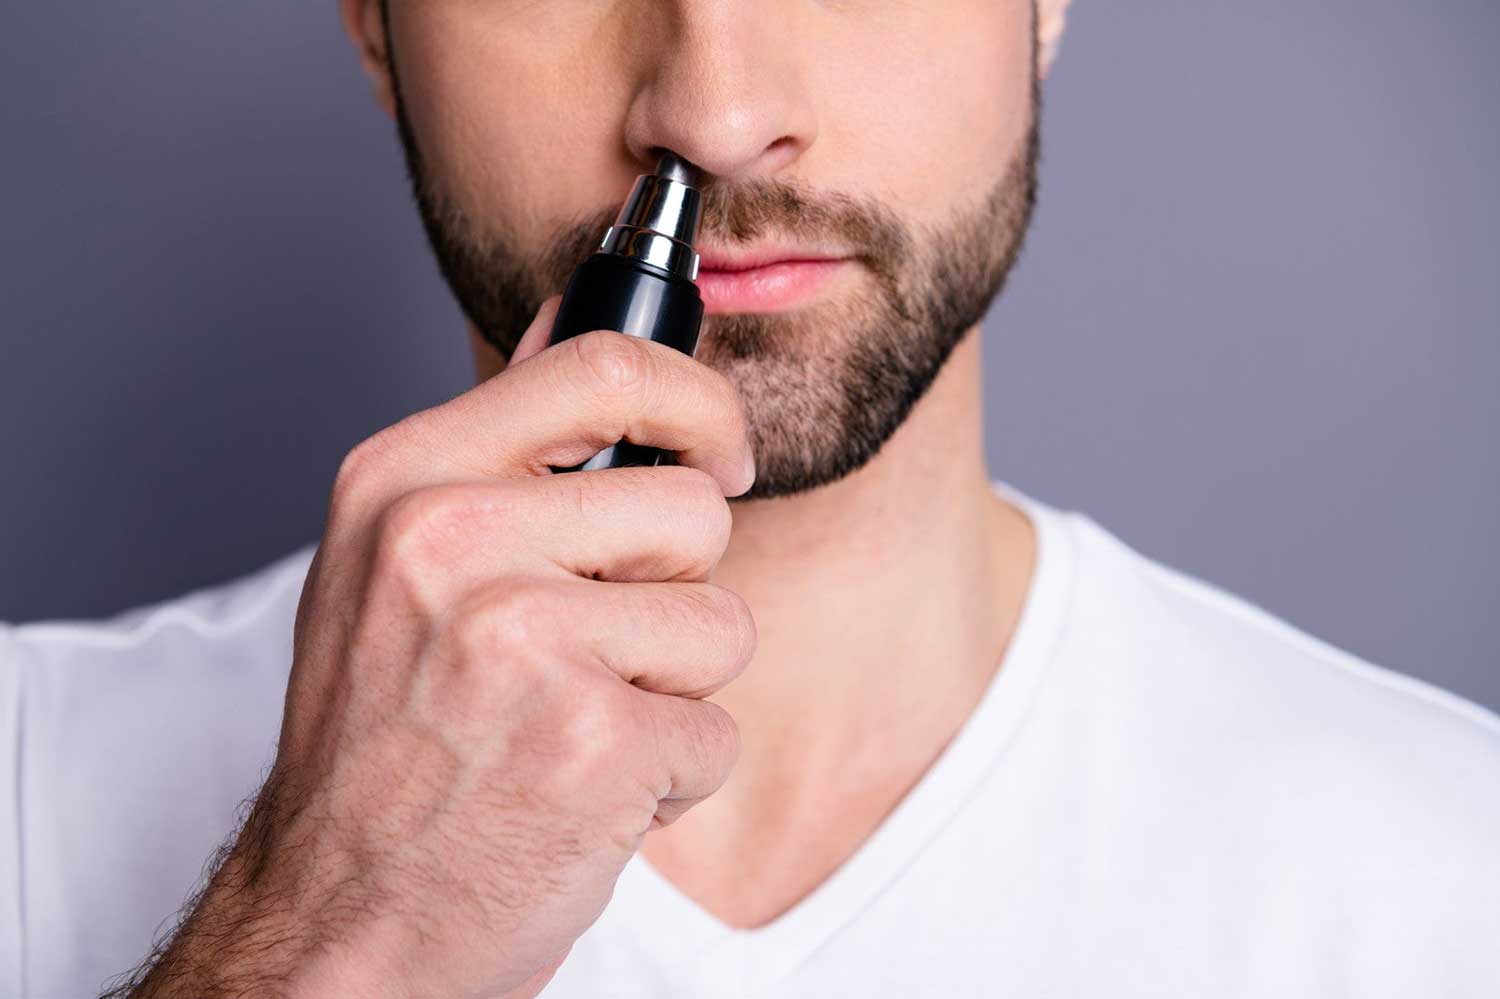 Trimming nose hairs is a great way for older men to look younger